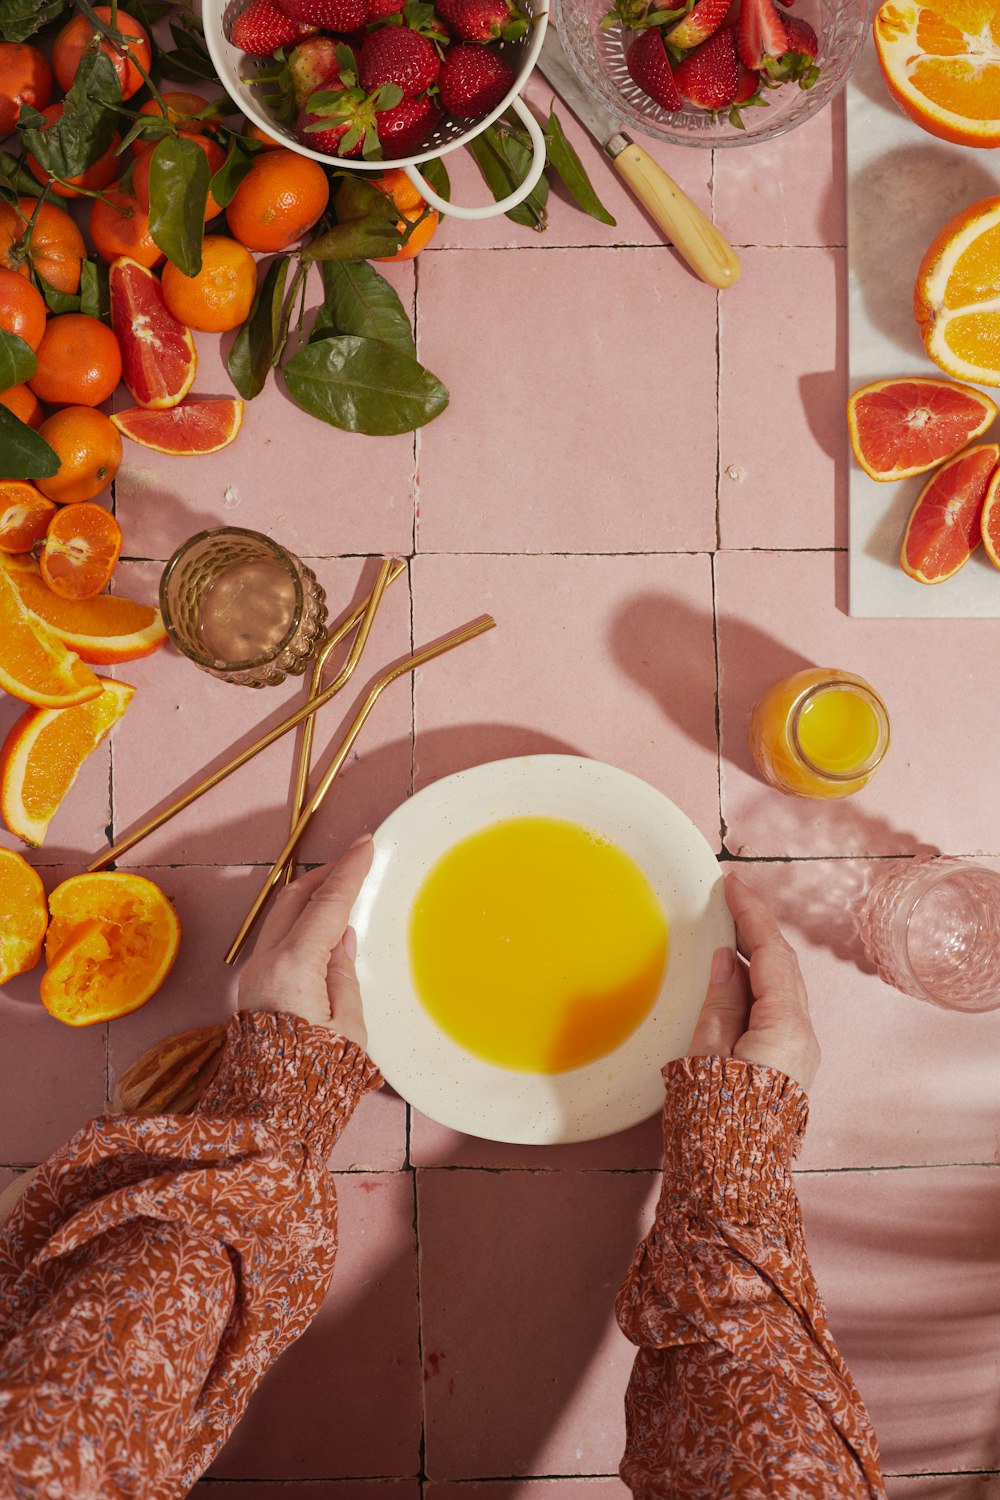 a person holding a bowl of orange juice